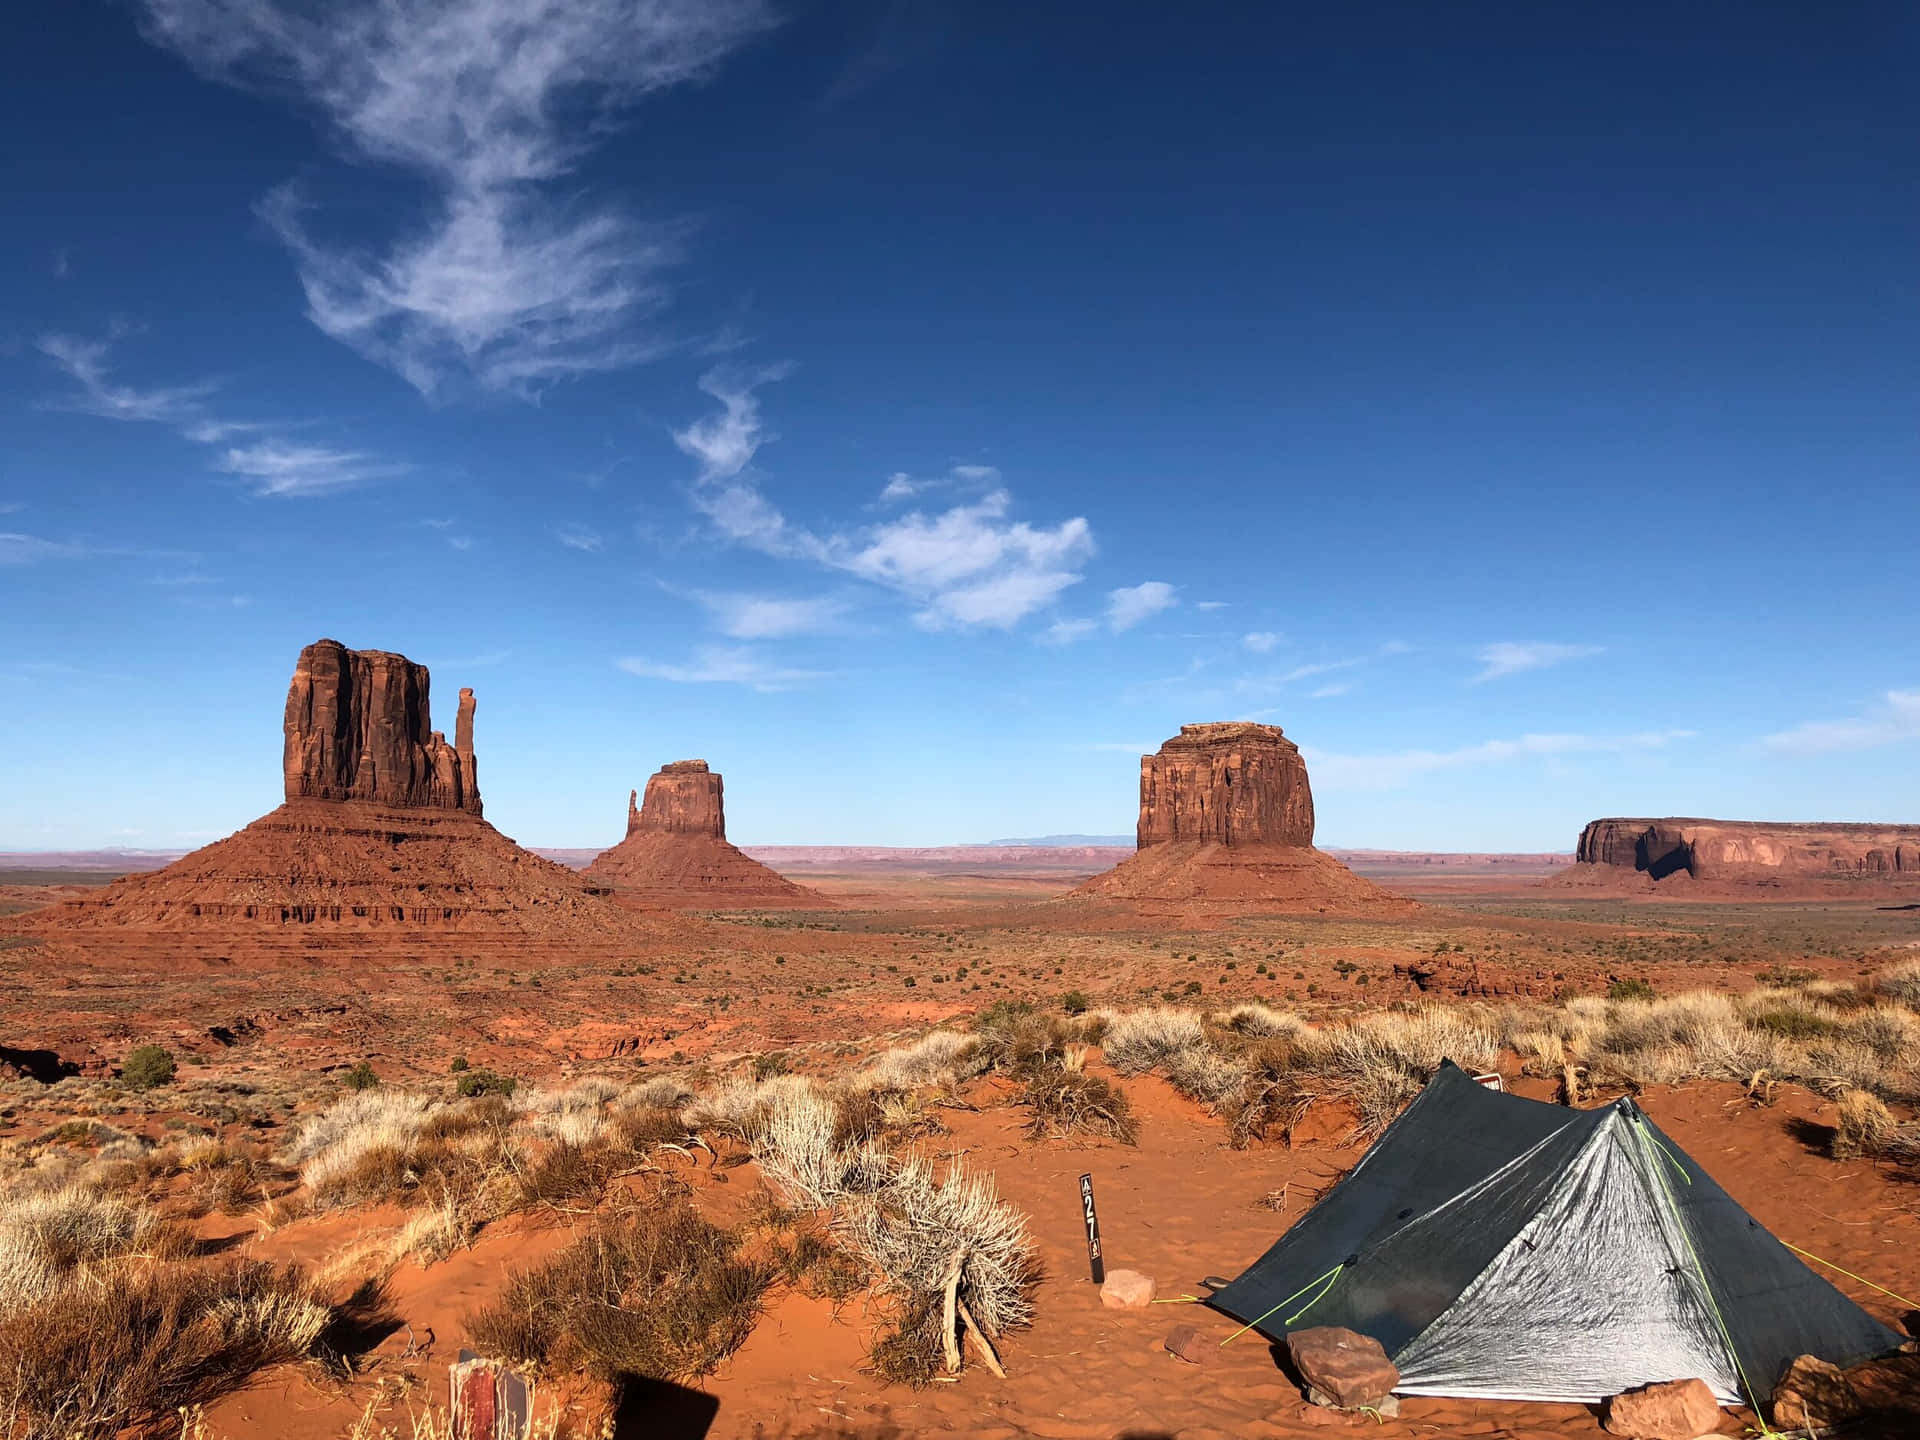 Monumentvalley Navajo Tribal Park, The View Campground - Monument Valley Navajo Tribal Park, The View Campground Wallpaper